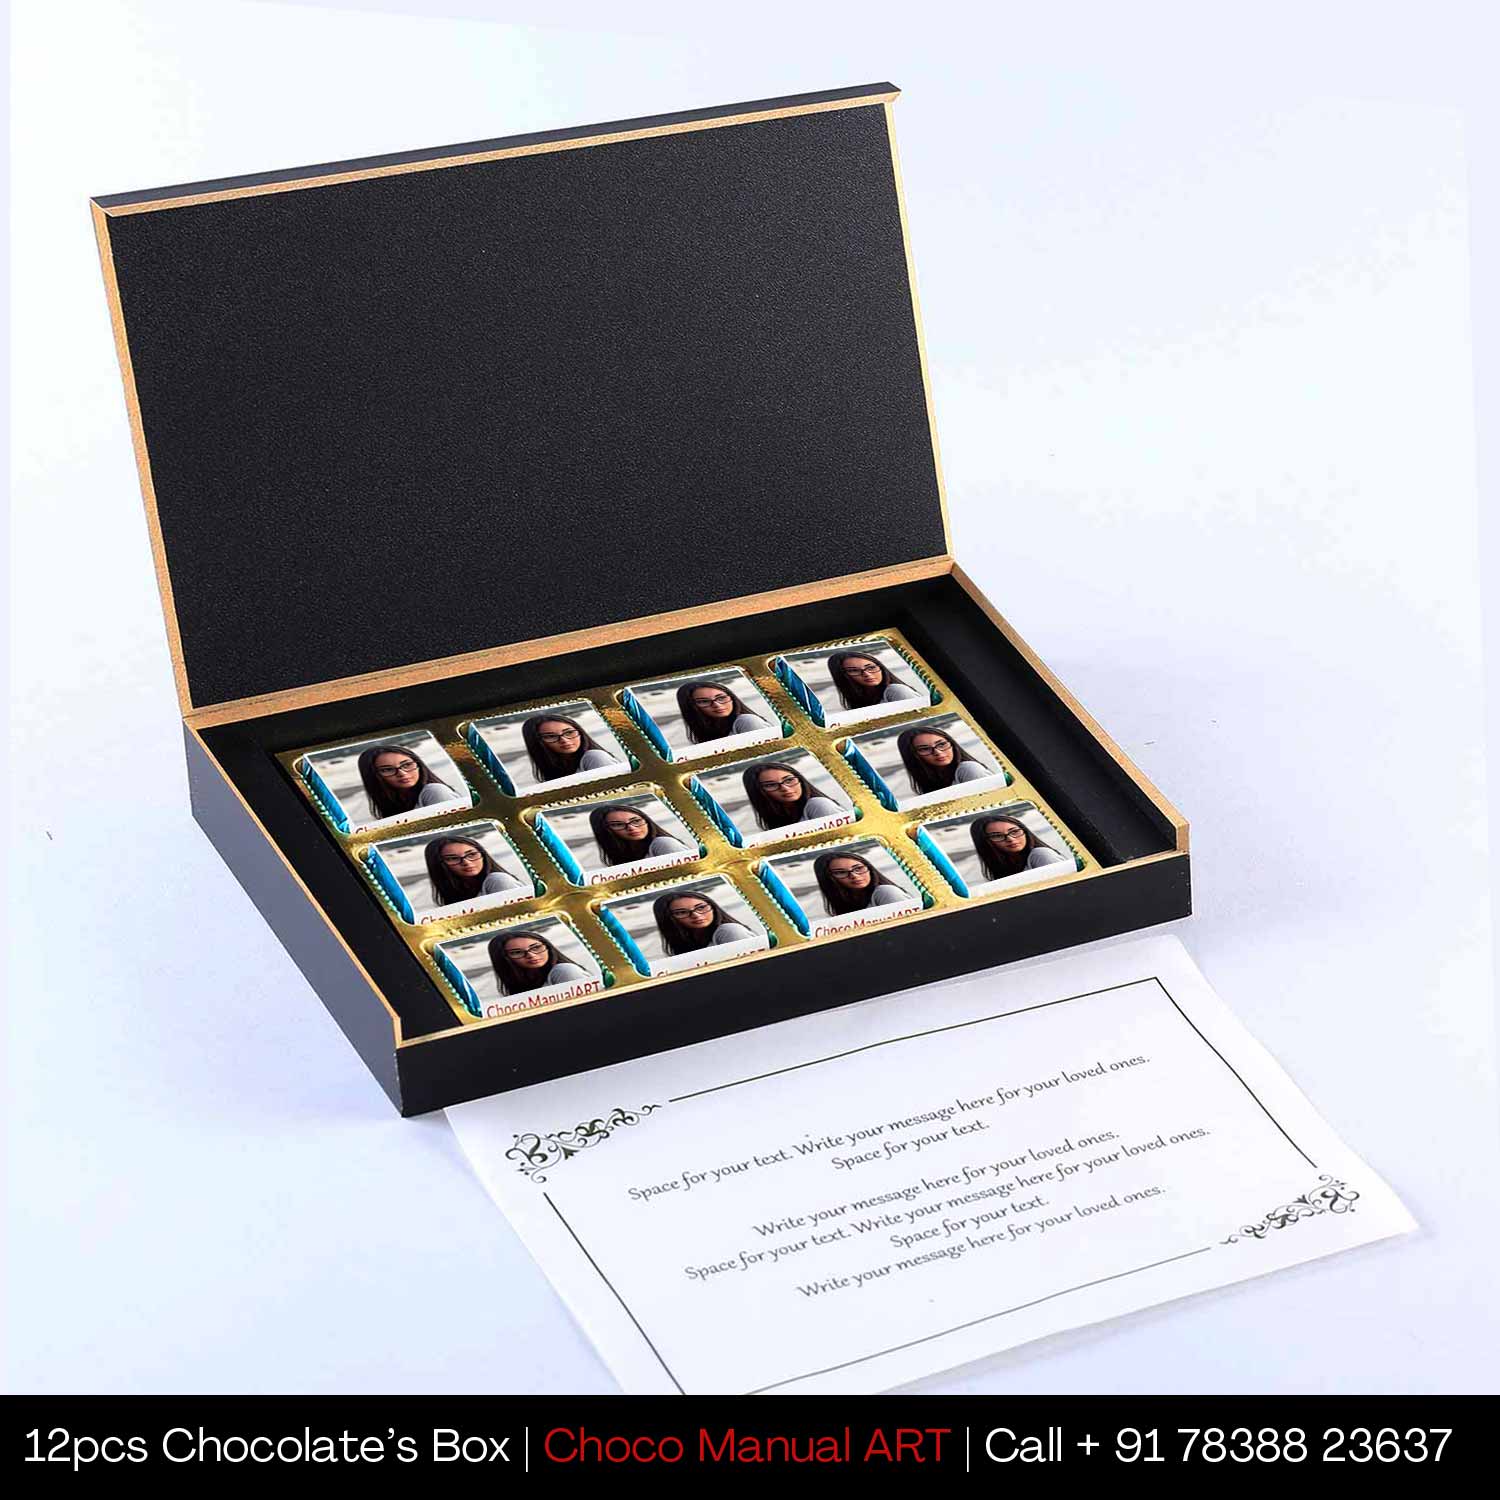 Customised gifts with name and photo printed on chocolate wrapper